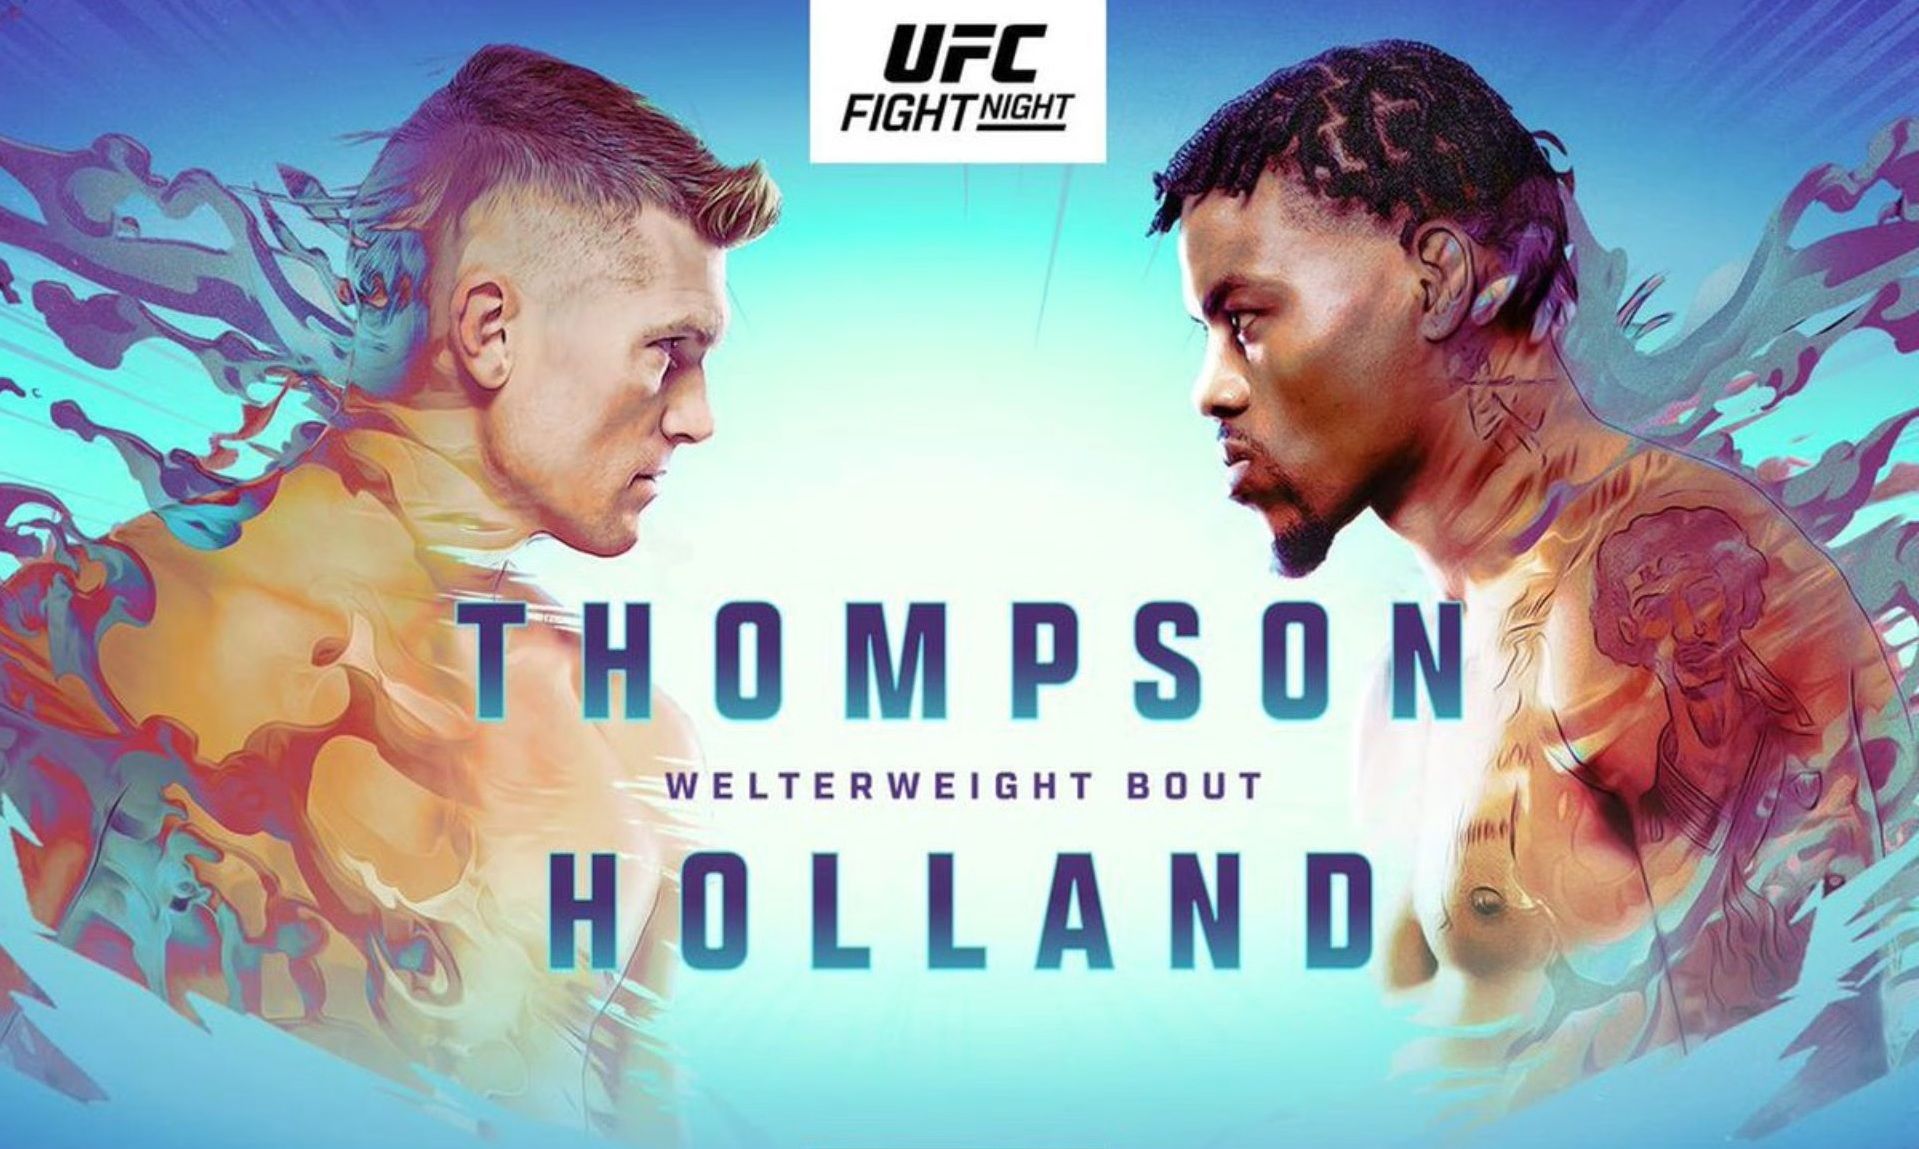 Stephen Thompson vs Kevin Holland: Preview, Where to watch and Betting Odds